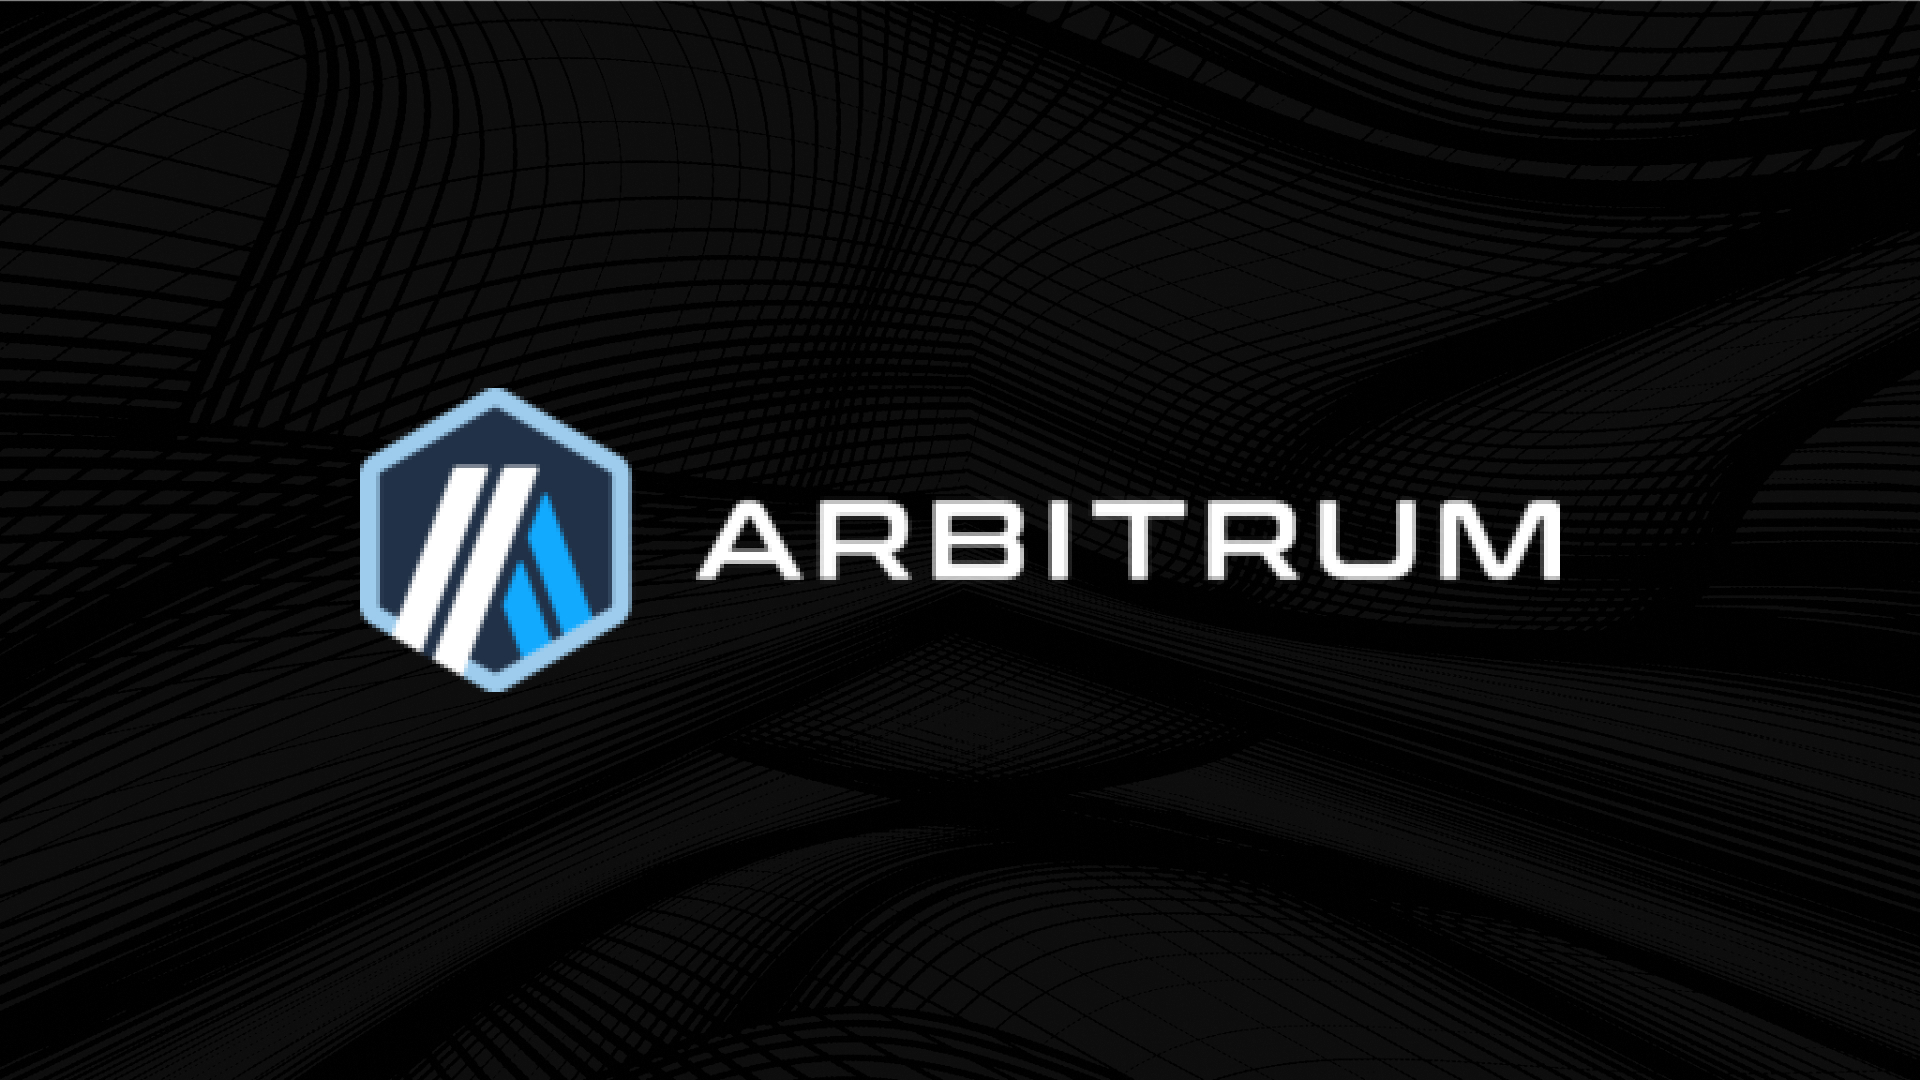 Arbitrum to Unlock $1B Worth of $ARB By March 2024